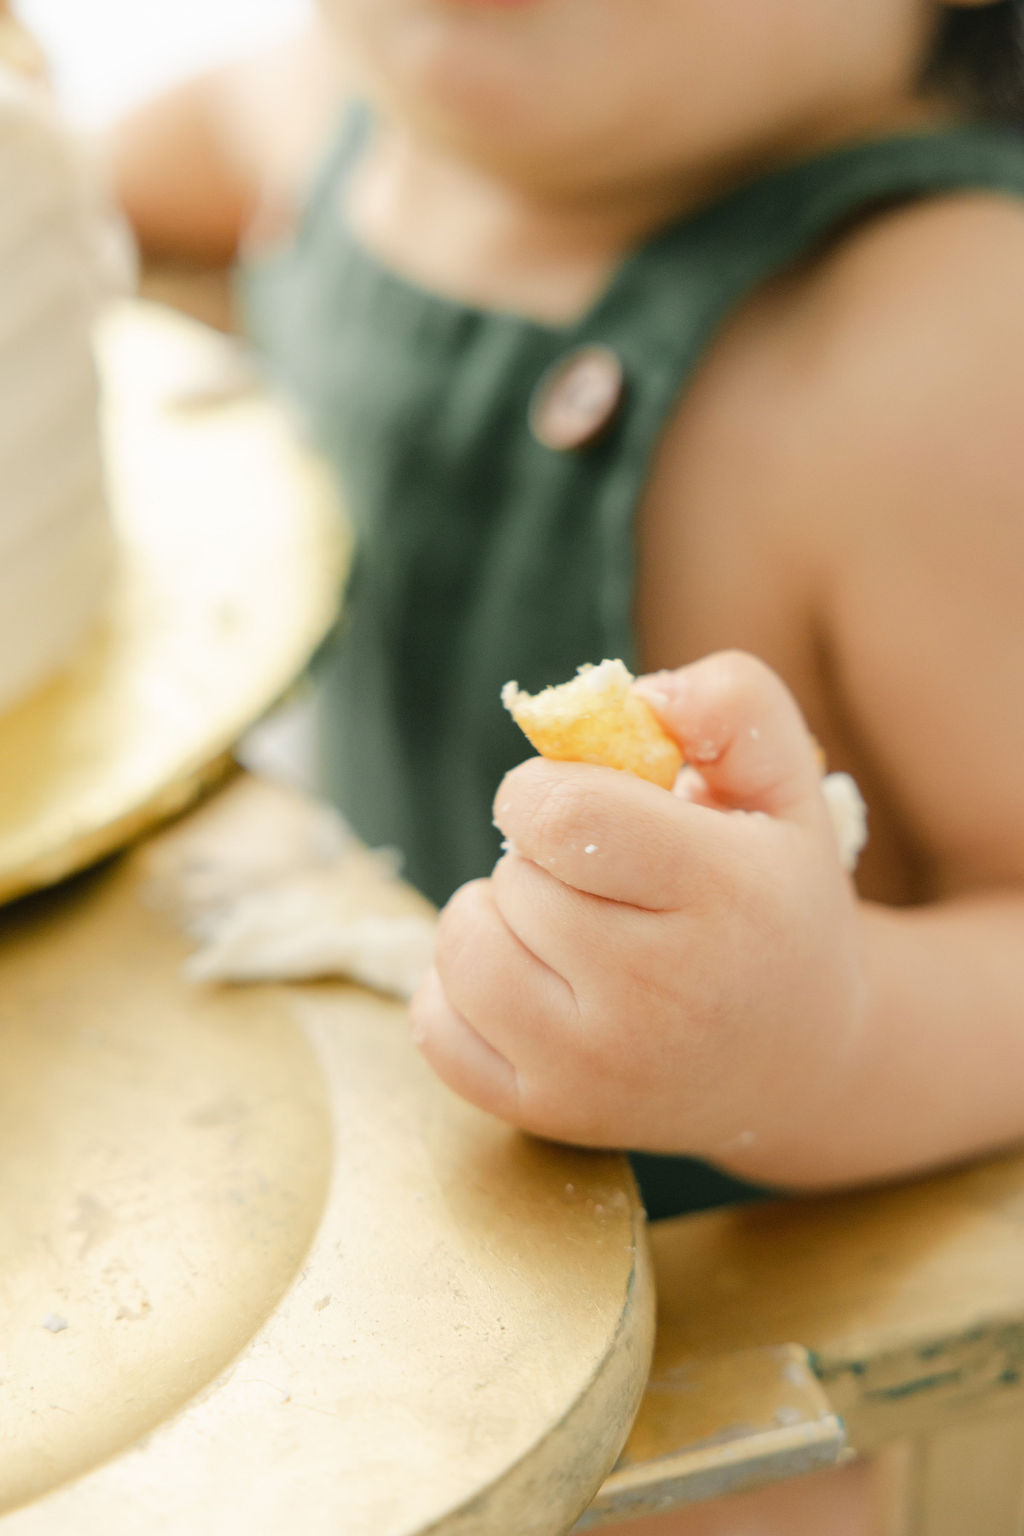 Details of an infant clutching a piece of cake while sitting in a gold high chair and green overalls from indianapolis cake shops